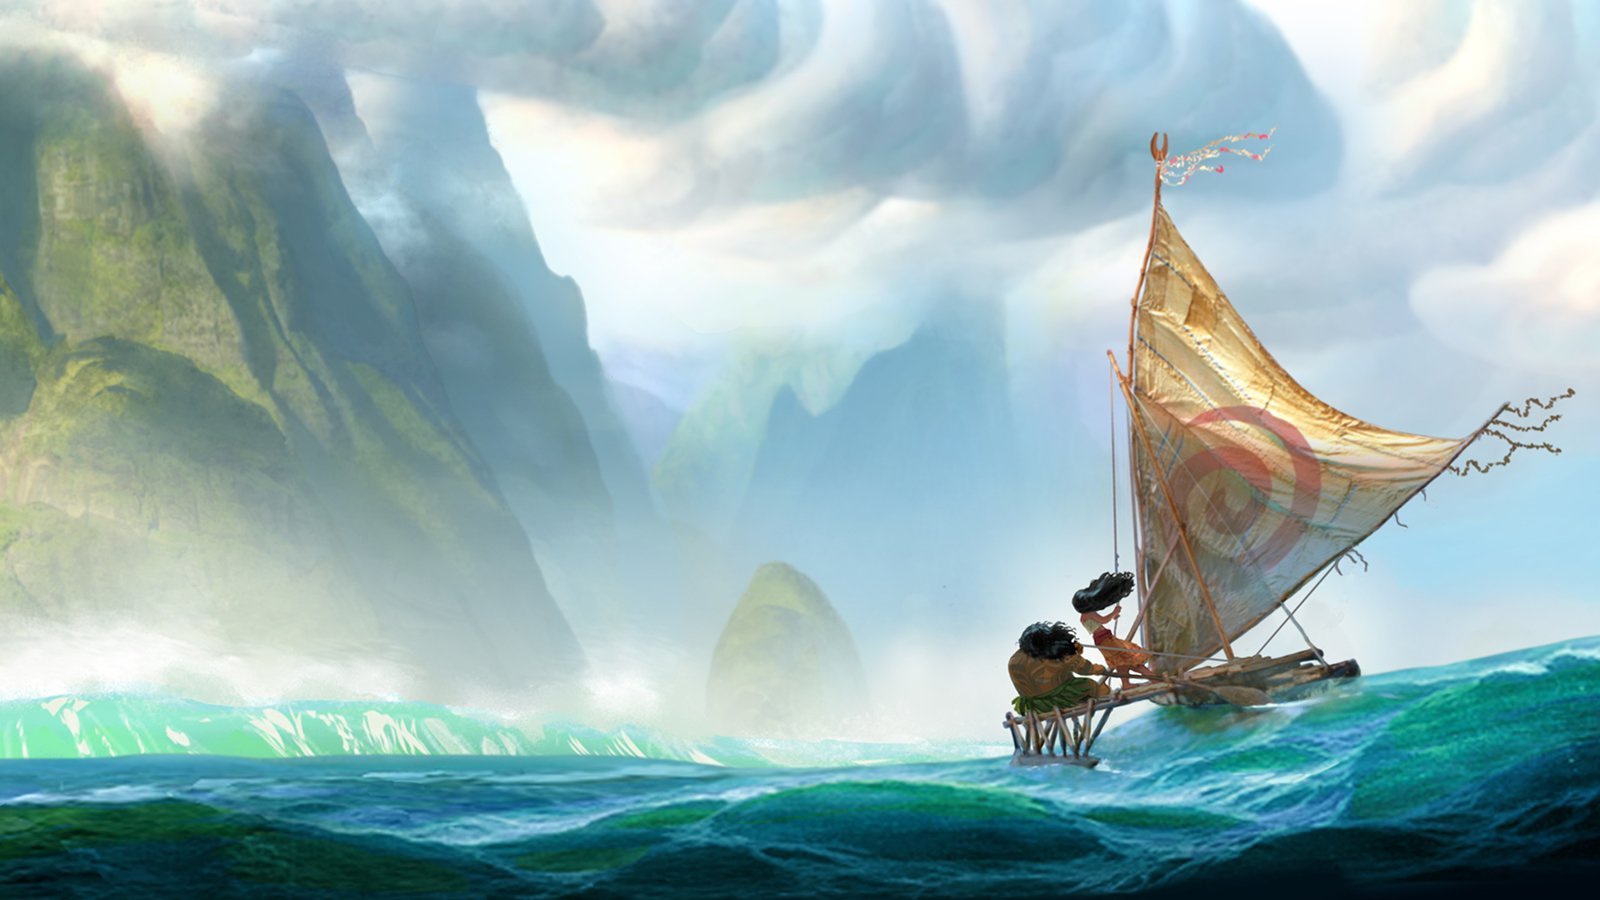 Moana Movie Wallpaper HD Background Of Your Choice